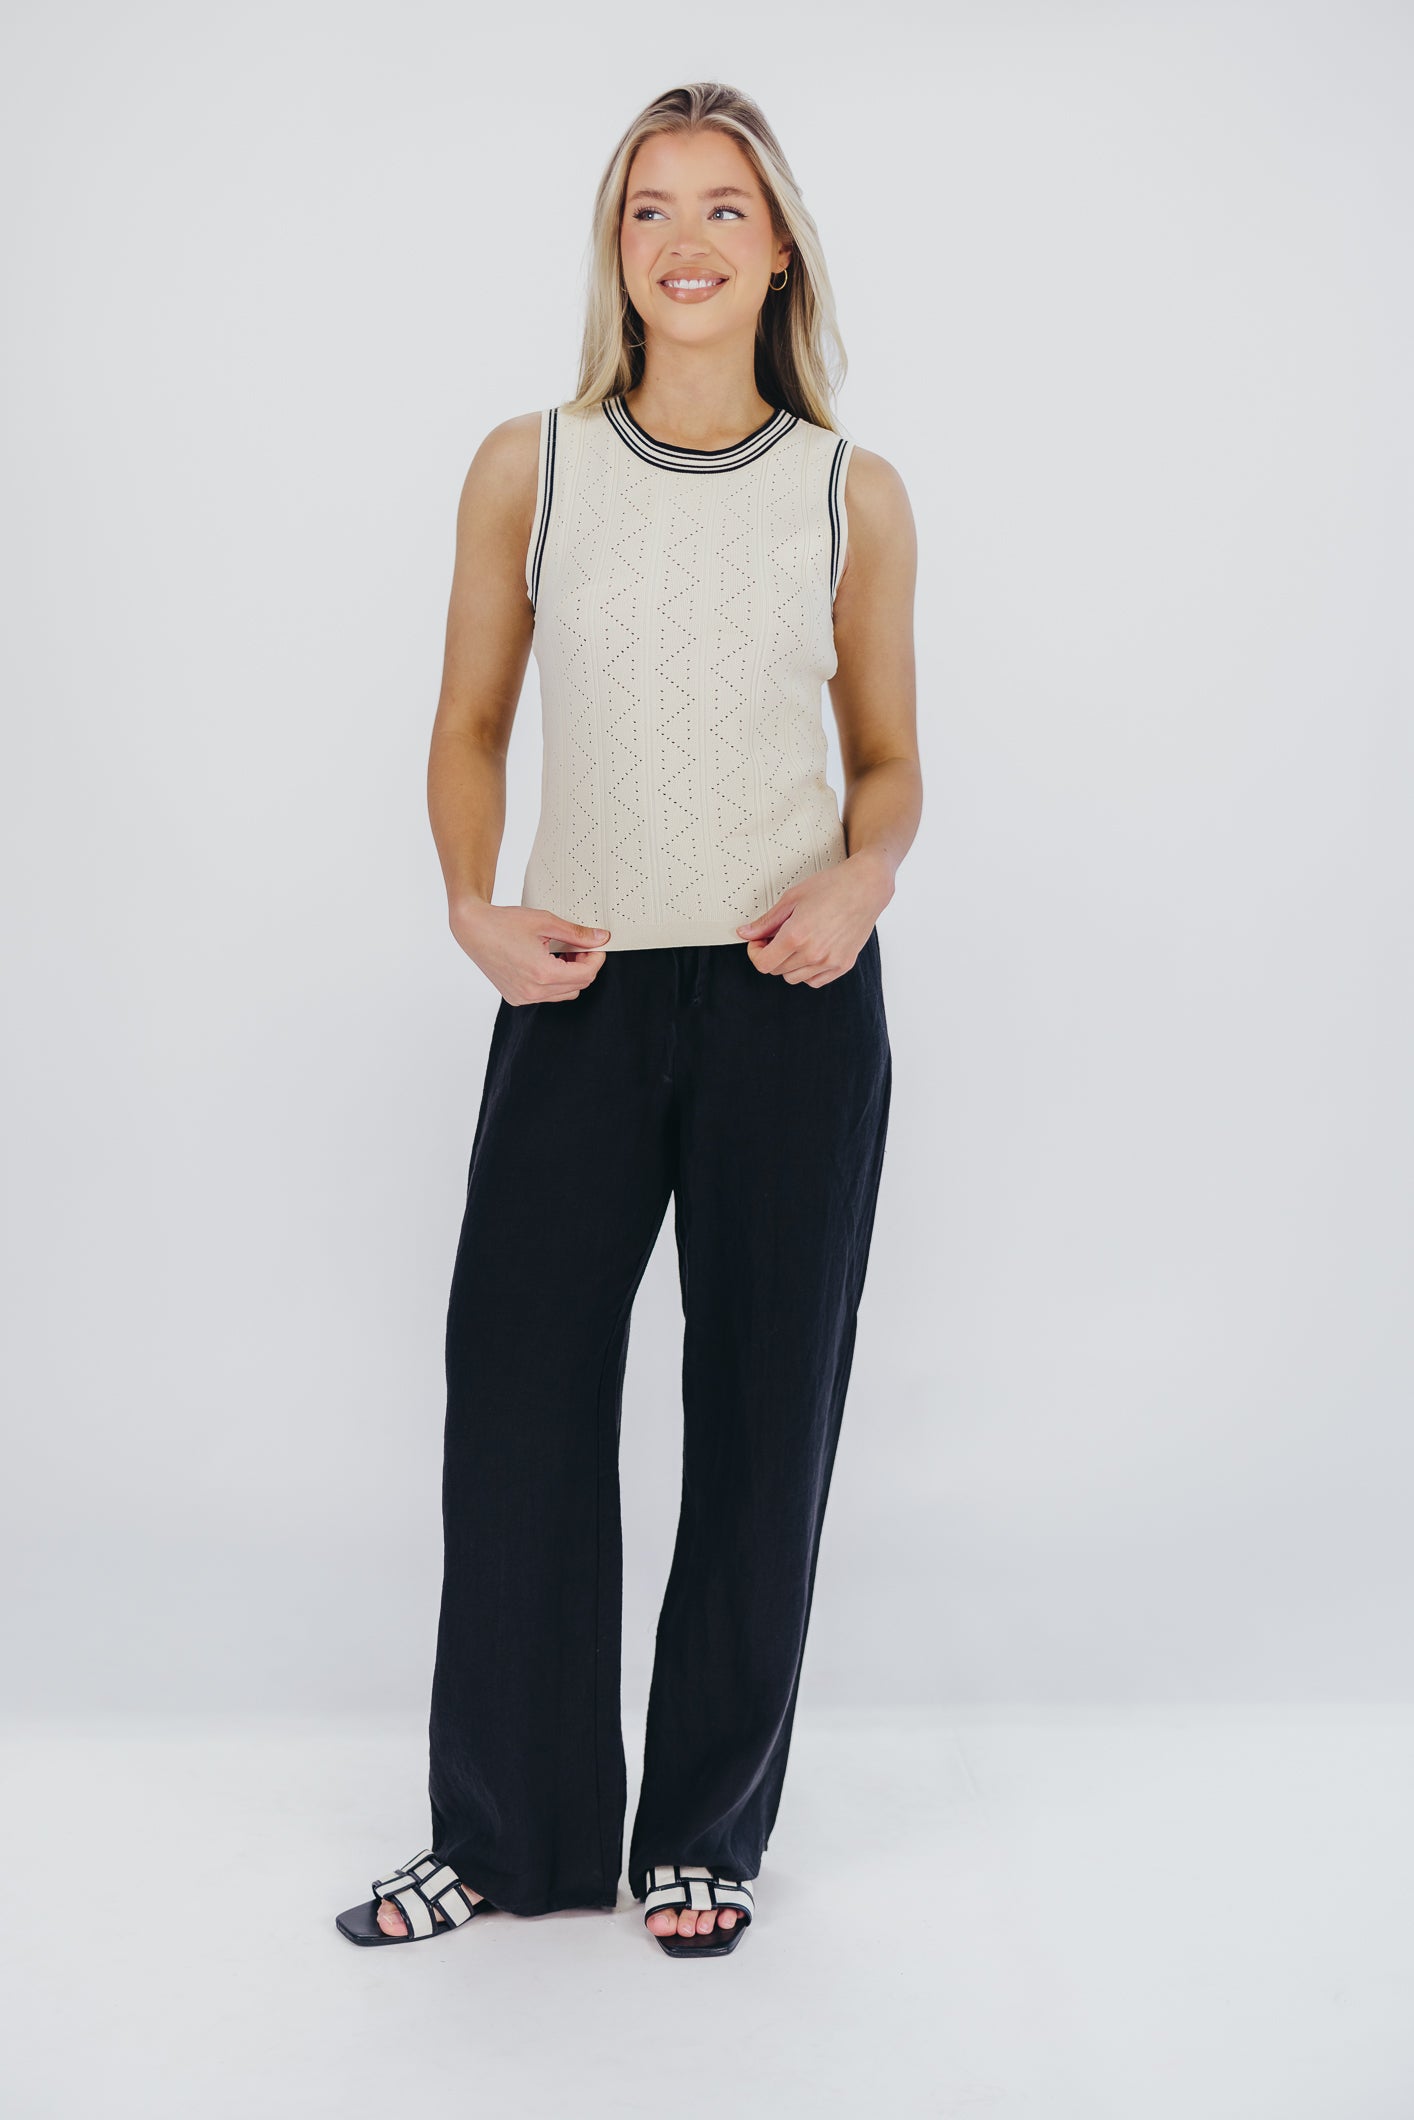 Margaux Contrast Detail Sweater Top in Cream/Black